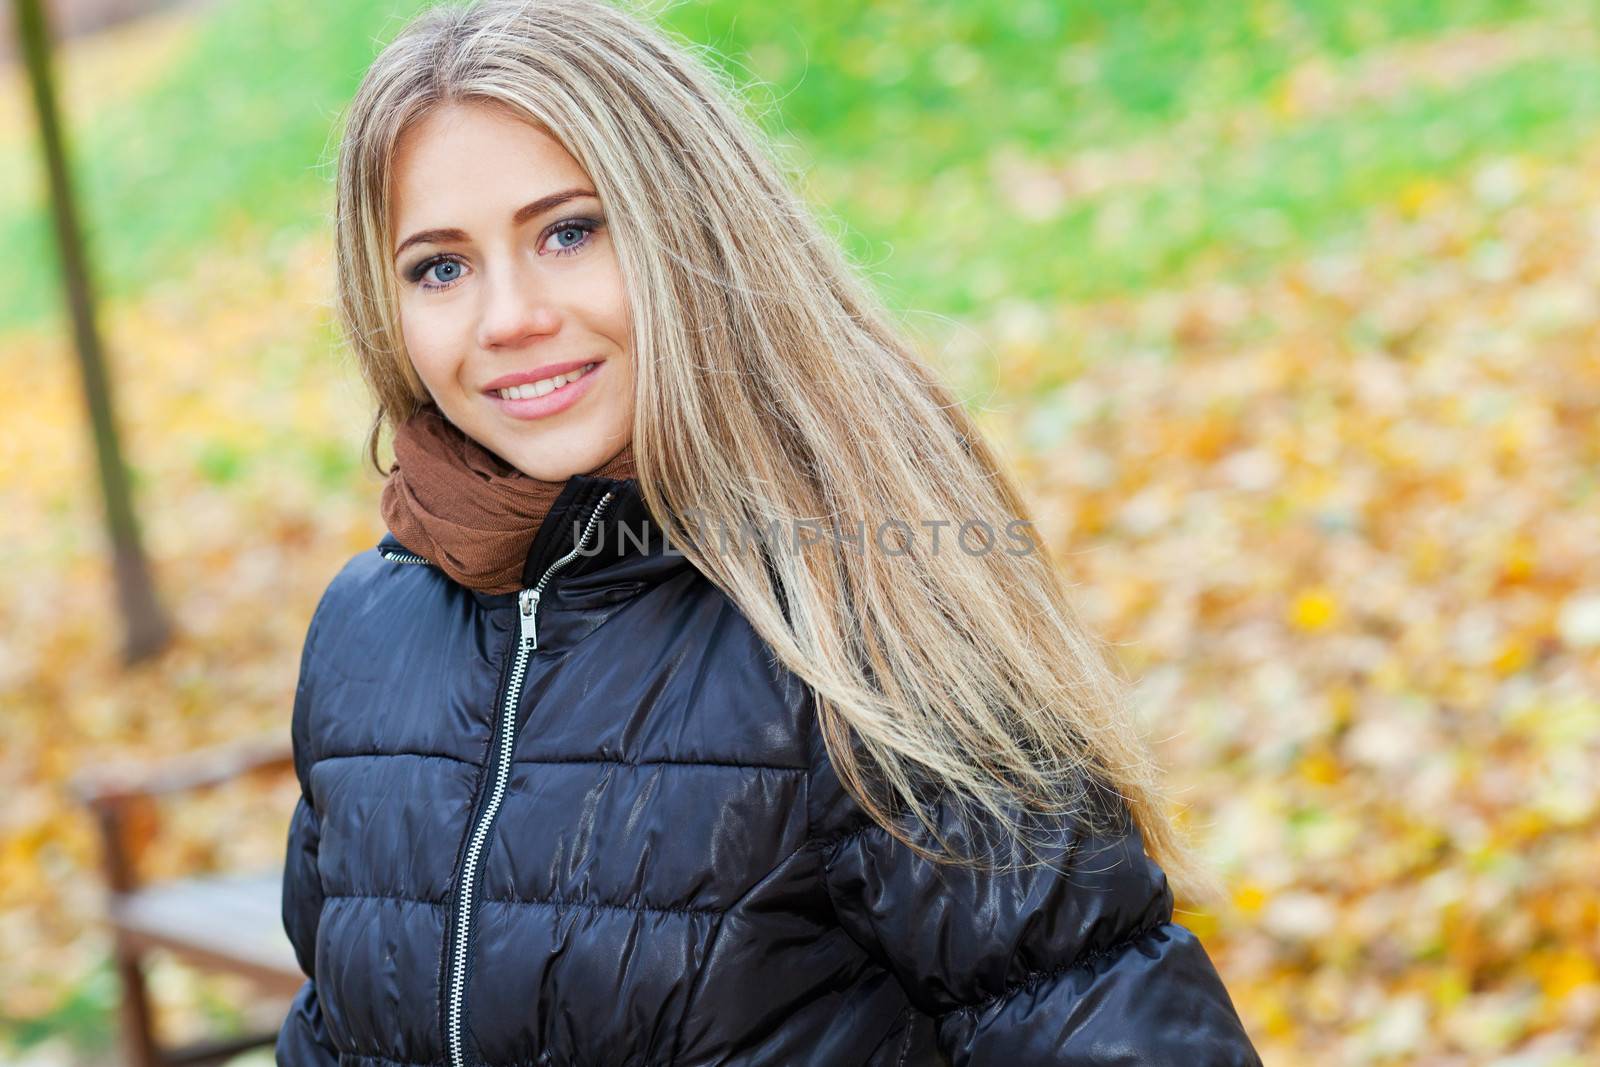 Pretty smiling woman walking in a park in autumn